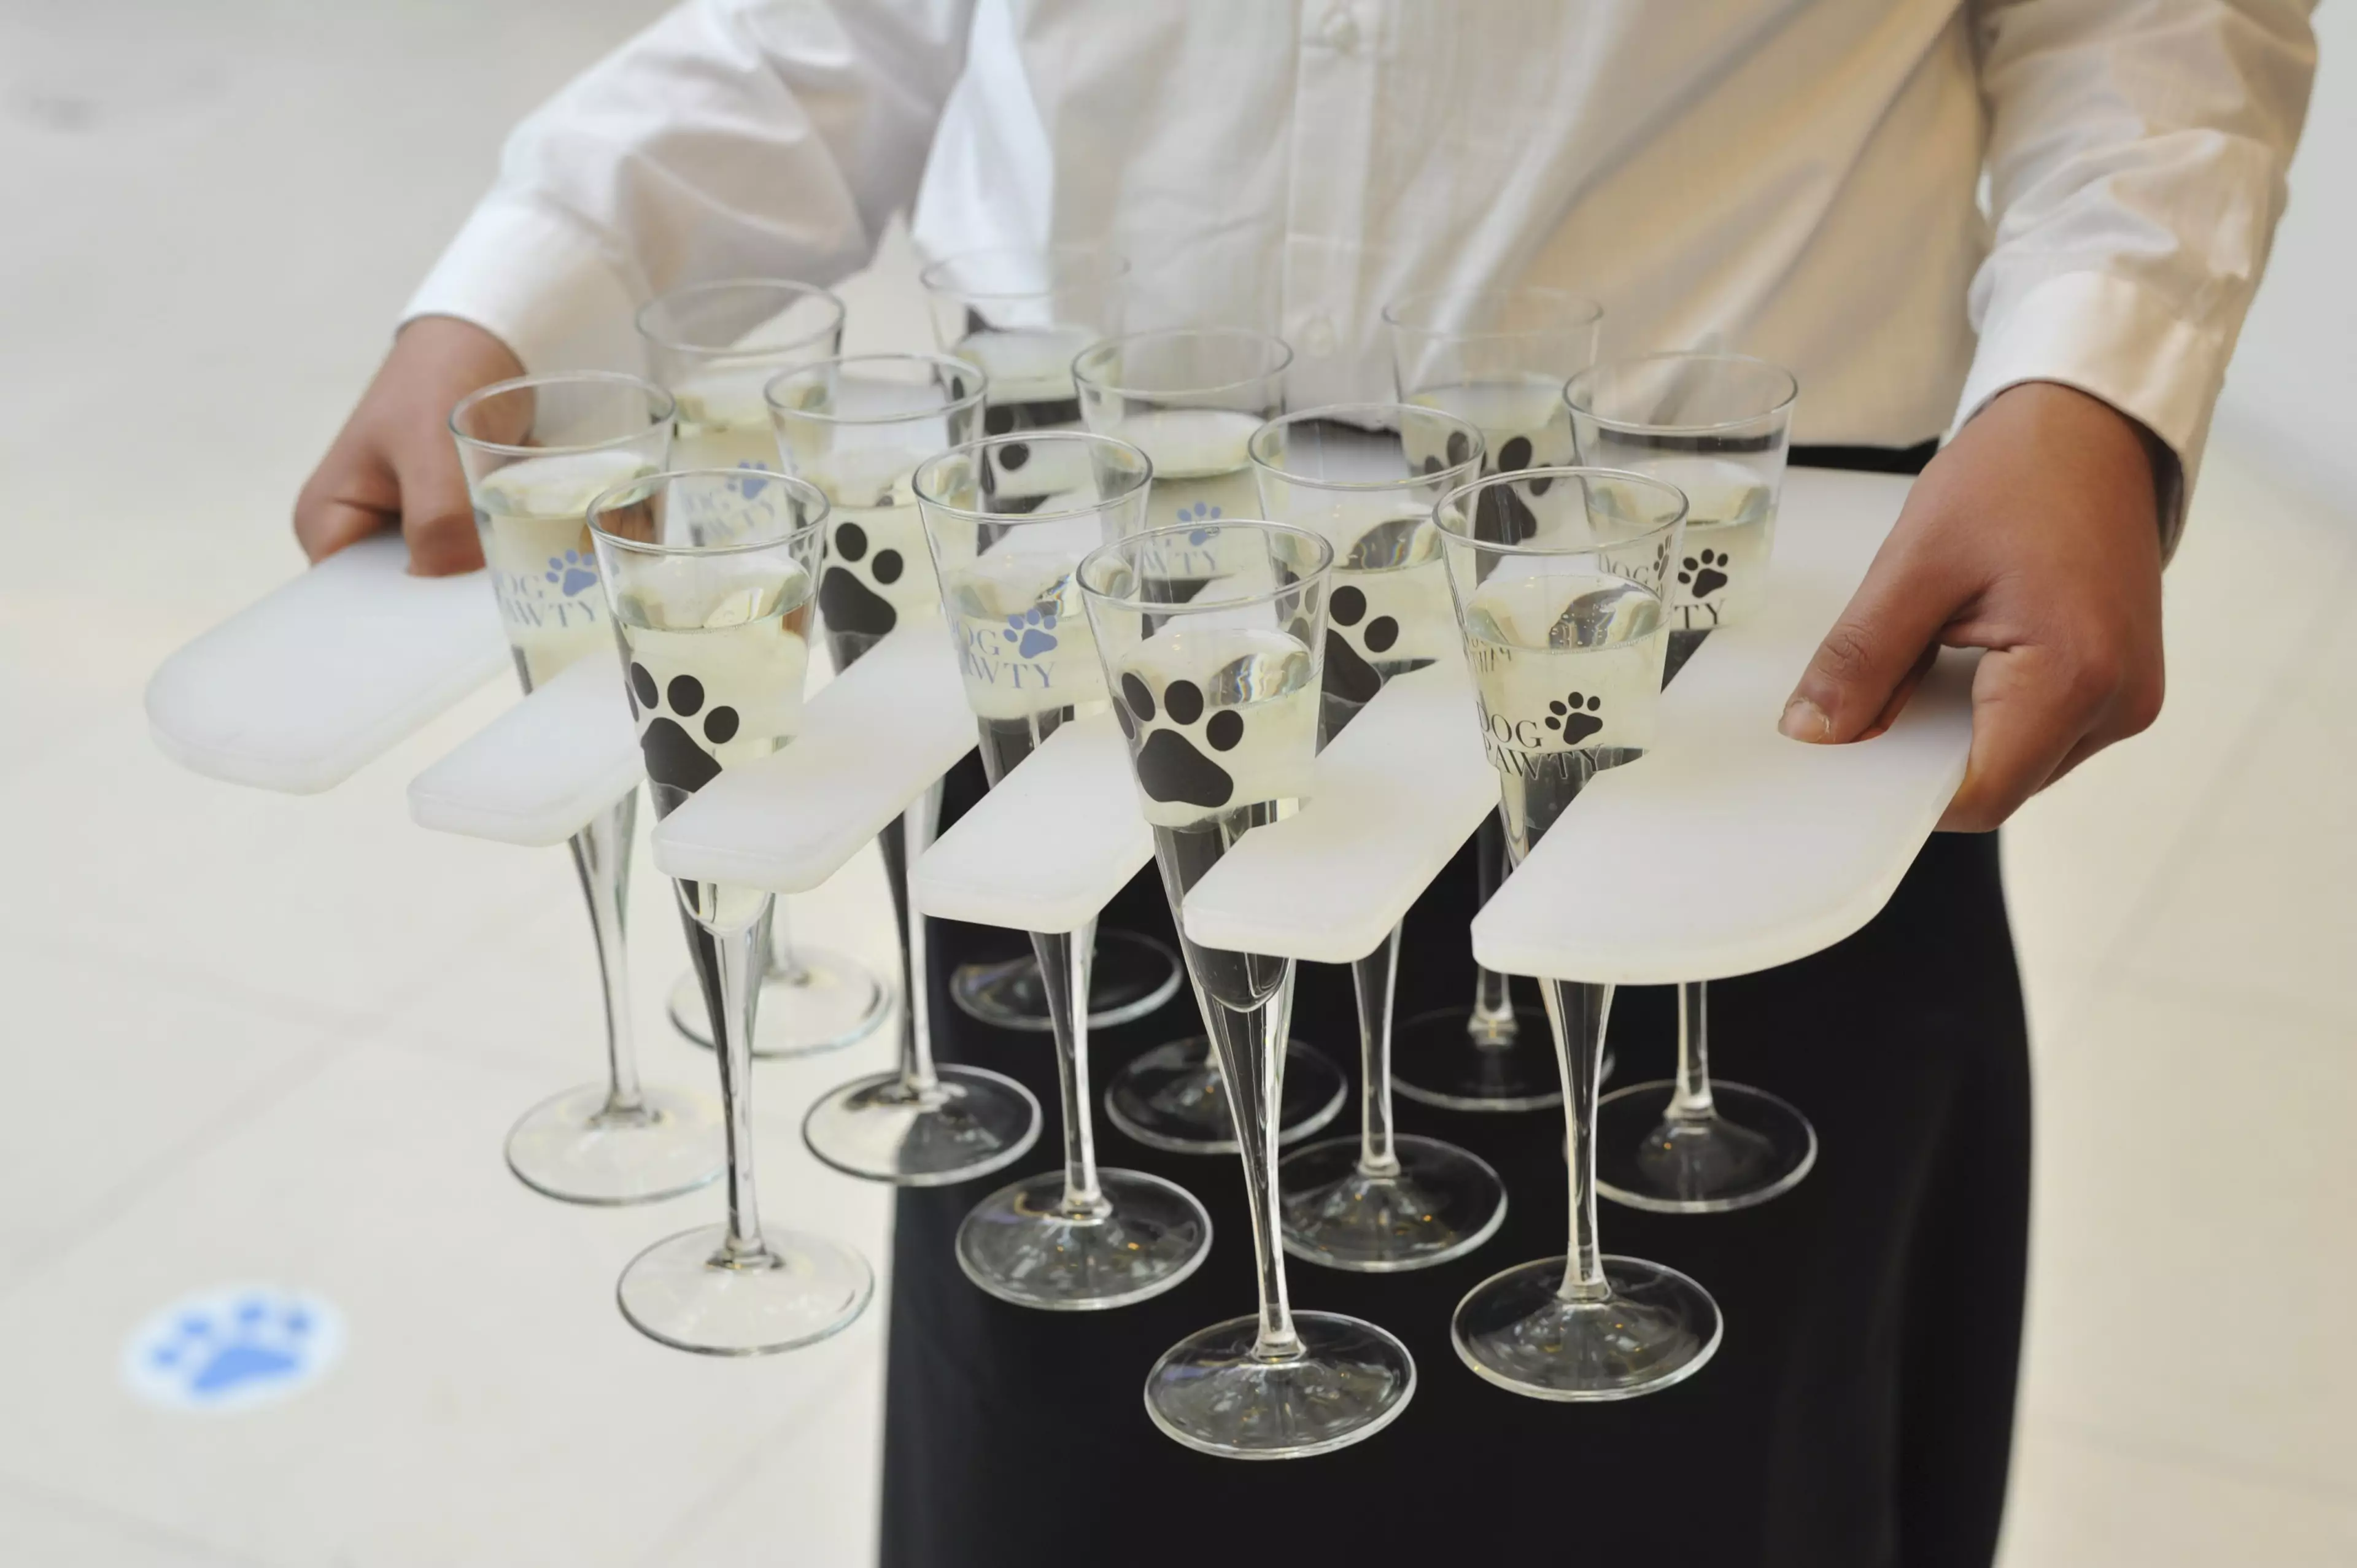 The dog pawties involve pawsecco for dogs and prosecco for their parents (